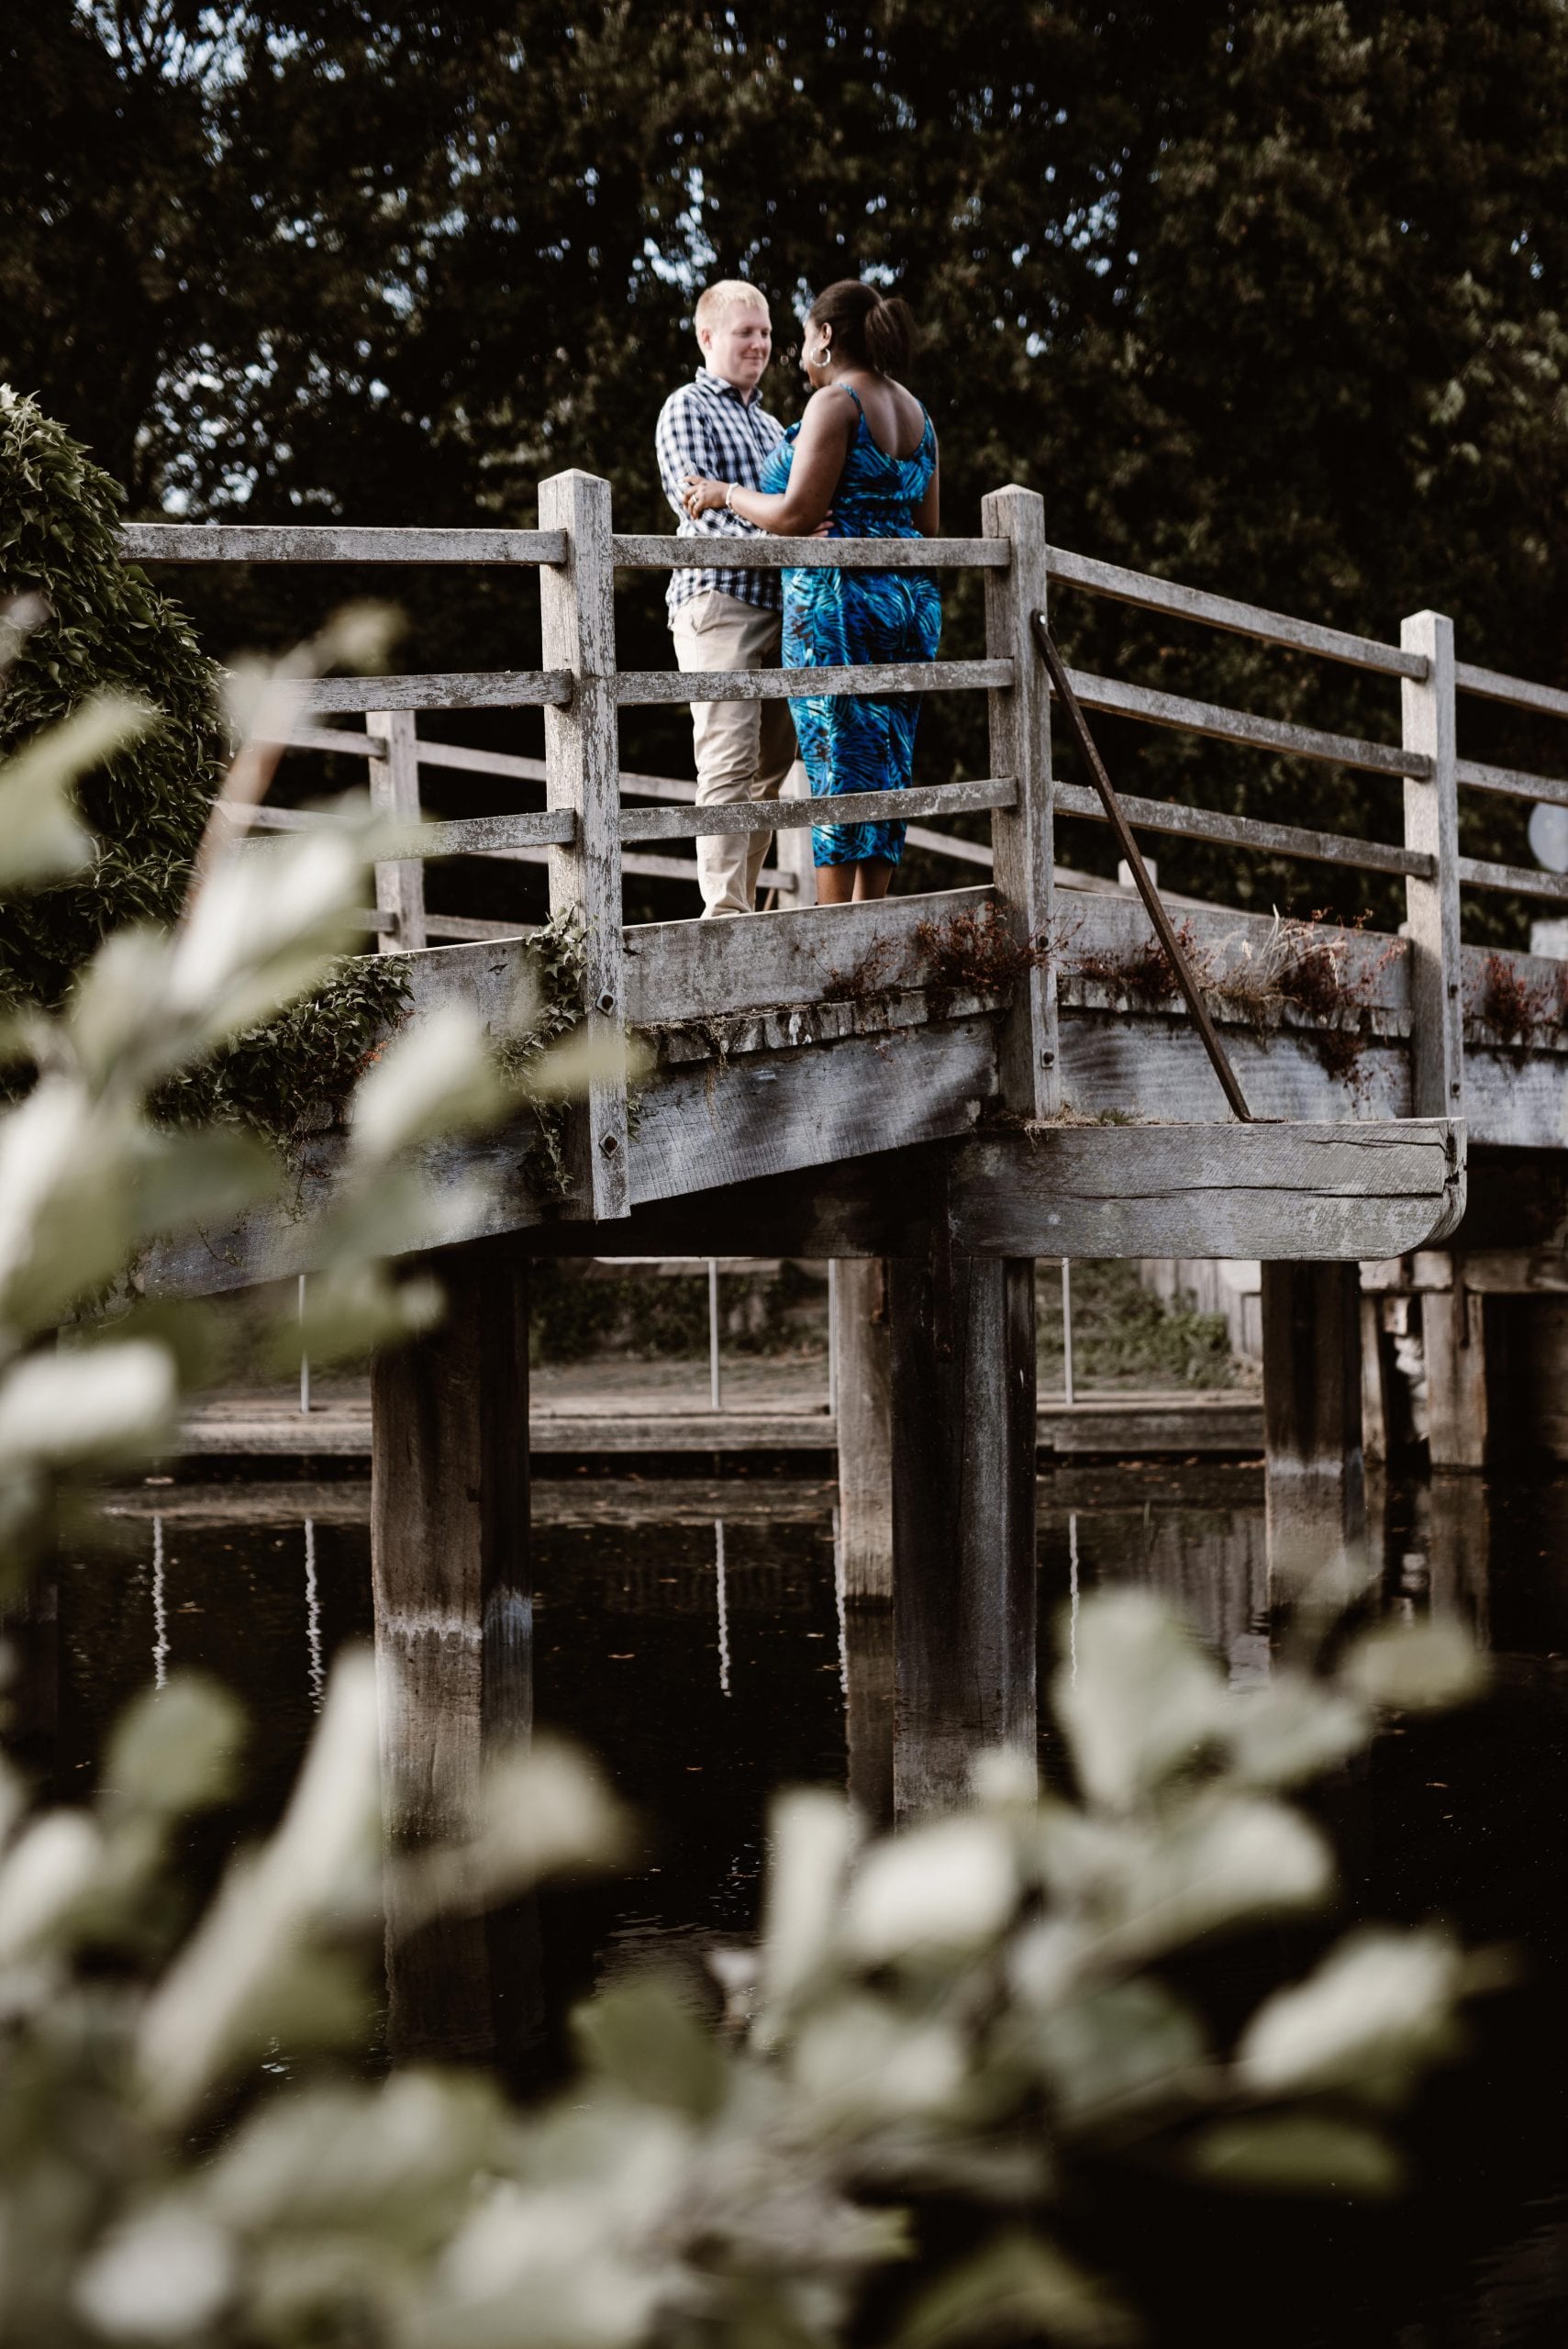 Engagement photoshoots, Say I love you with a Valentine’s engagement photoshoot﻿, The Menagerie Lifestyle Photography